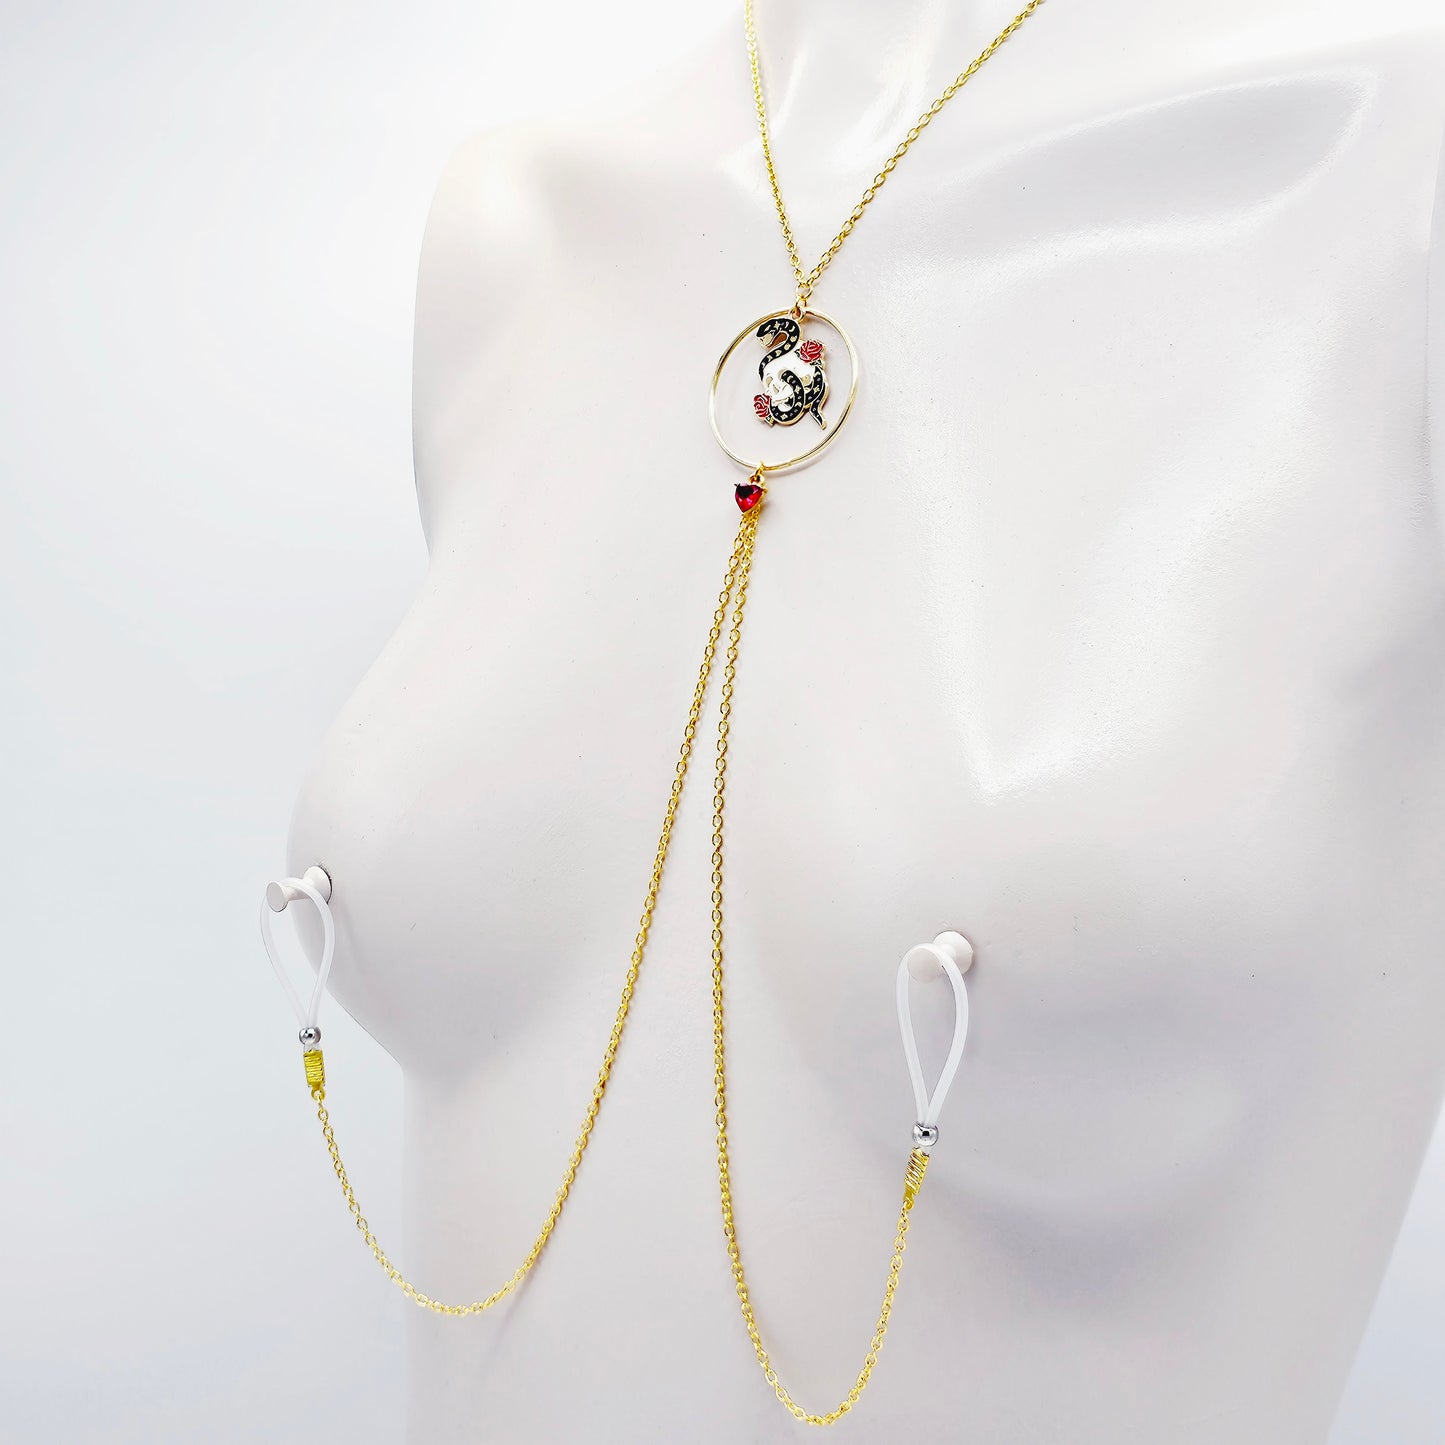 Nipple Chain Necklace with Non Piercing Nipple Nooses, Clamps, or for Use with Piercings. Gold with Serpent Skull and Circle Pendant